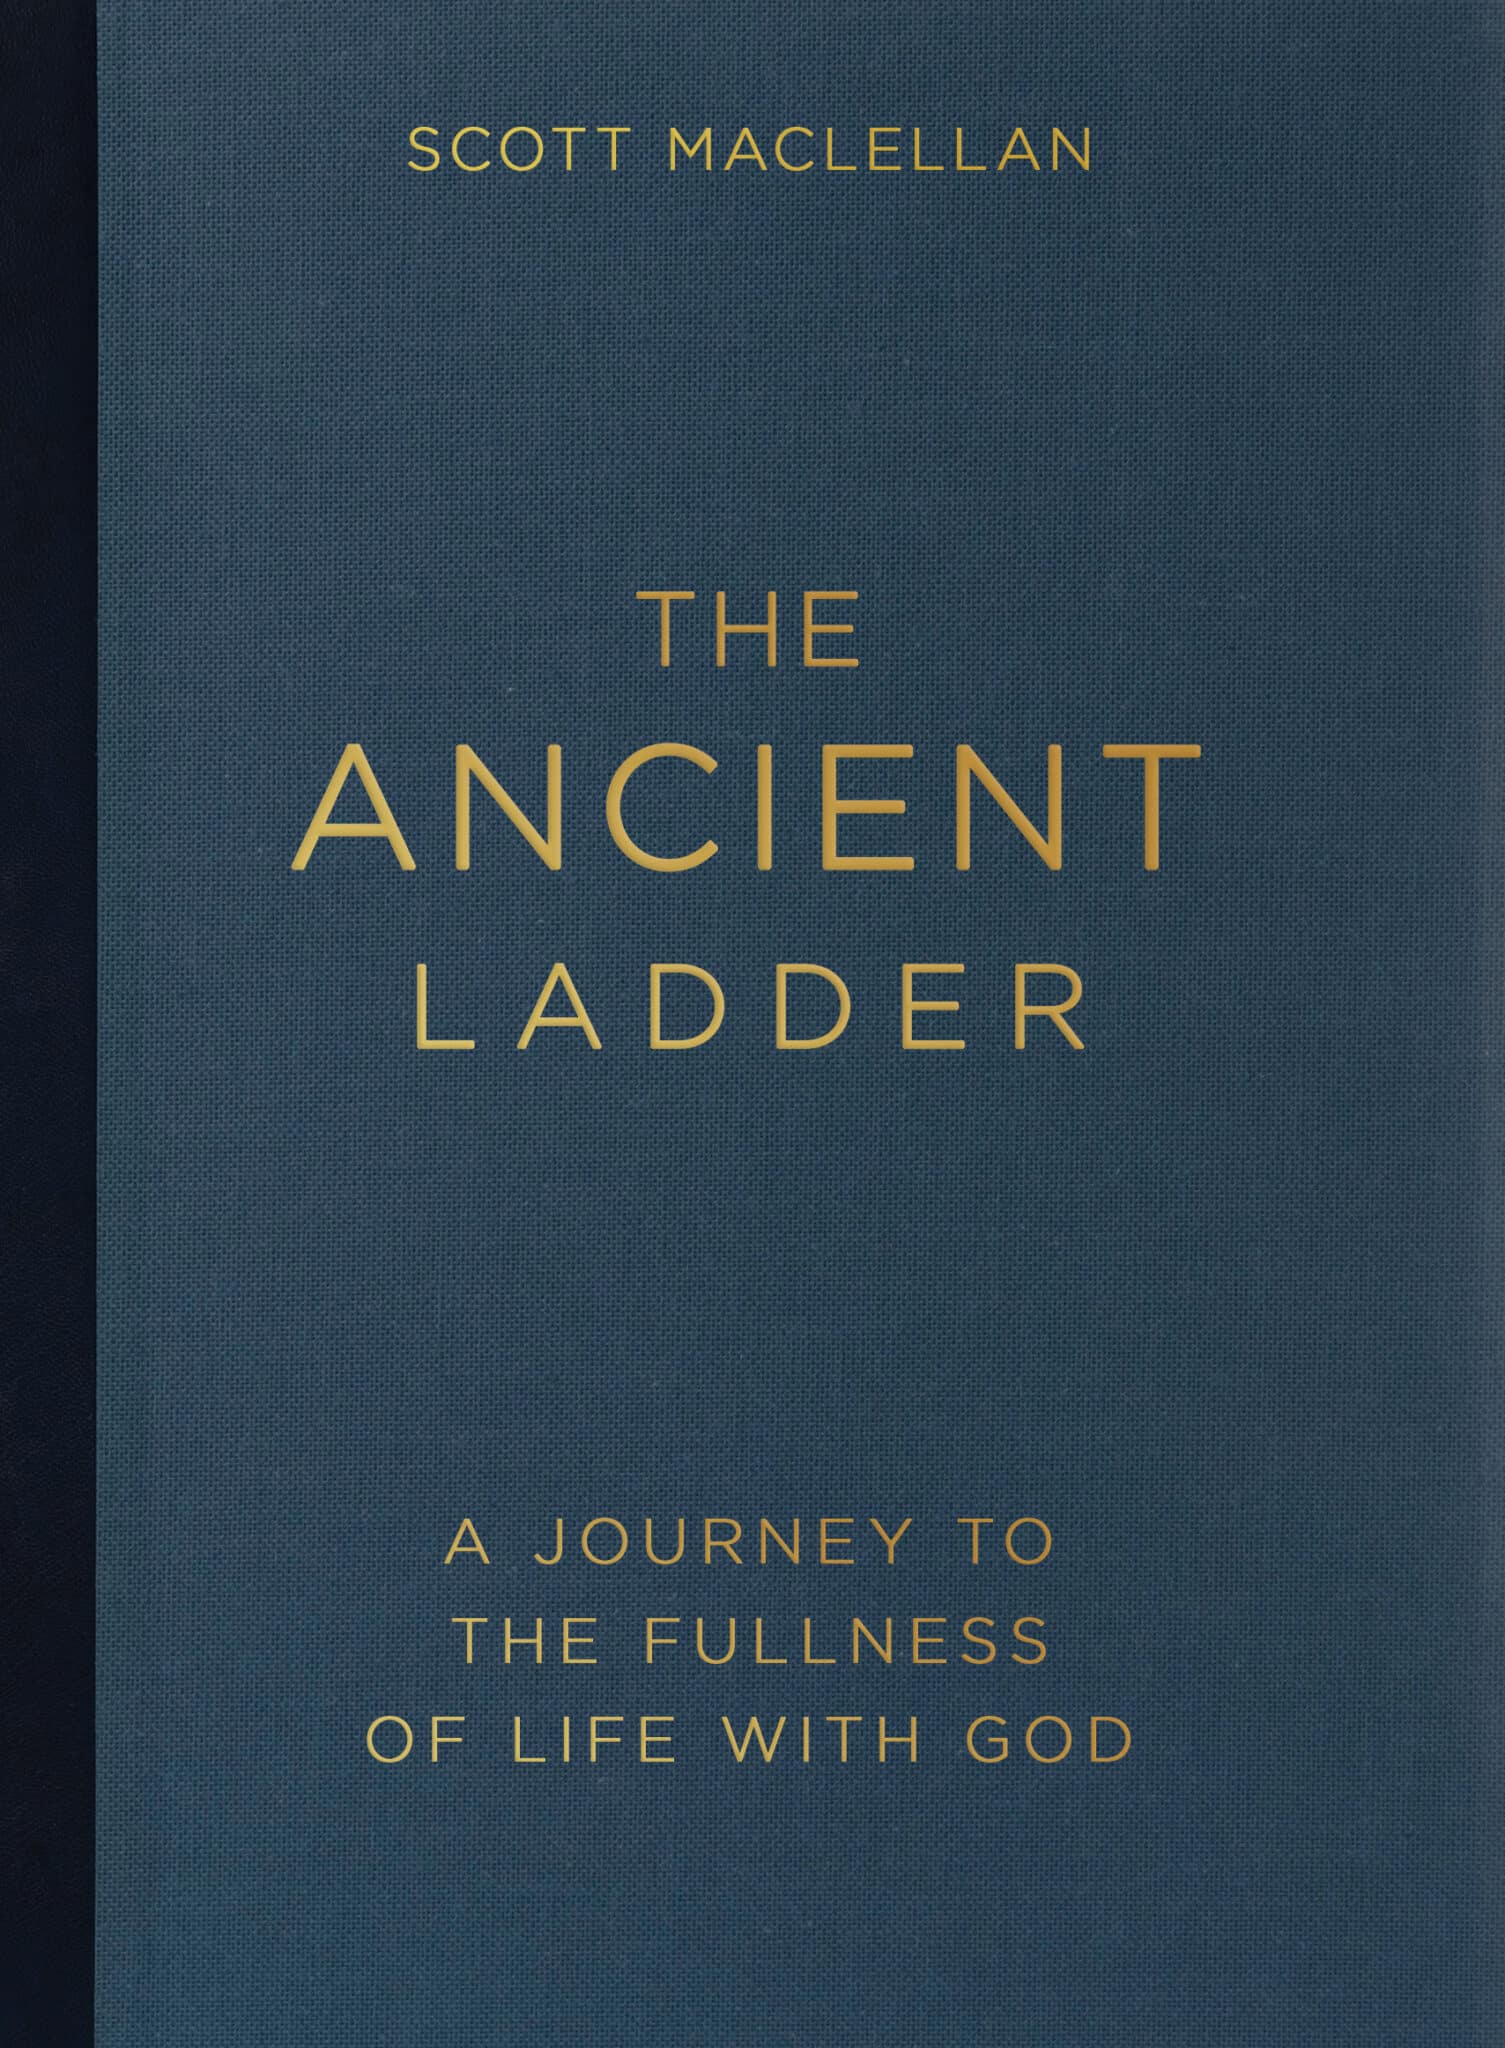 The ancient ladder book cover image